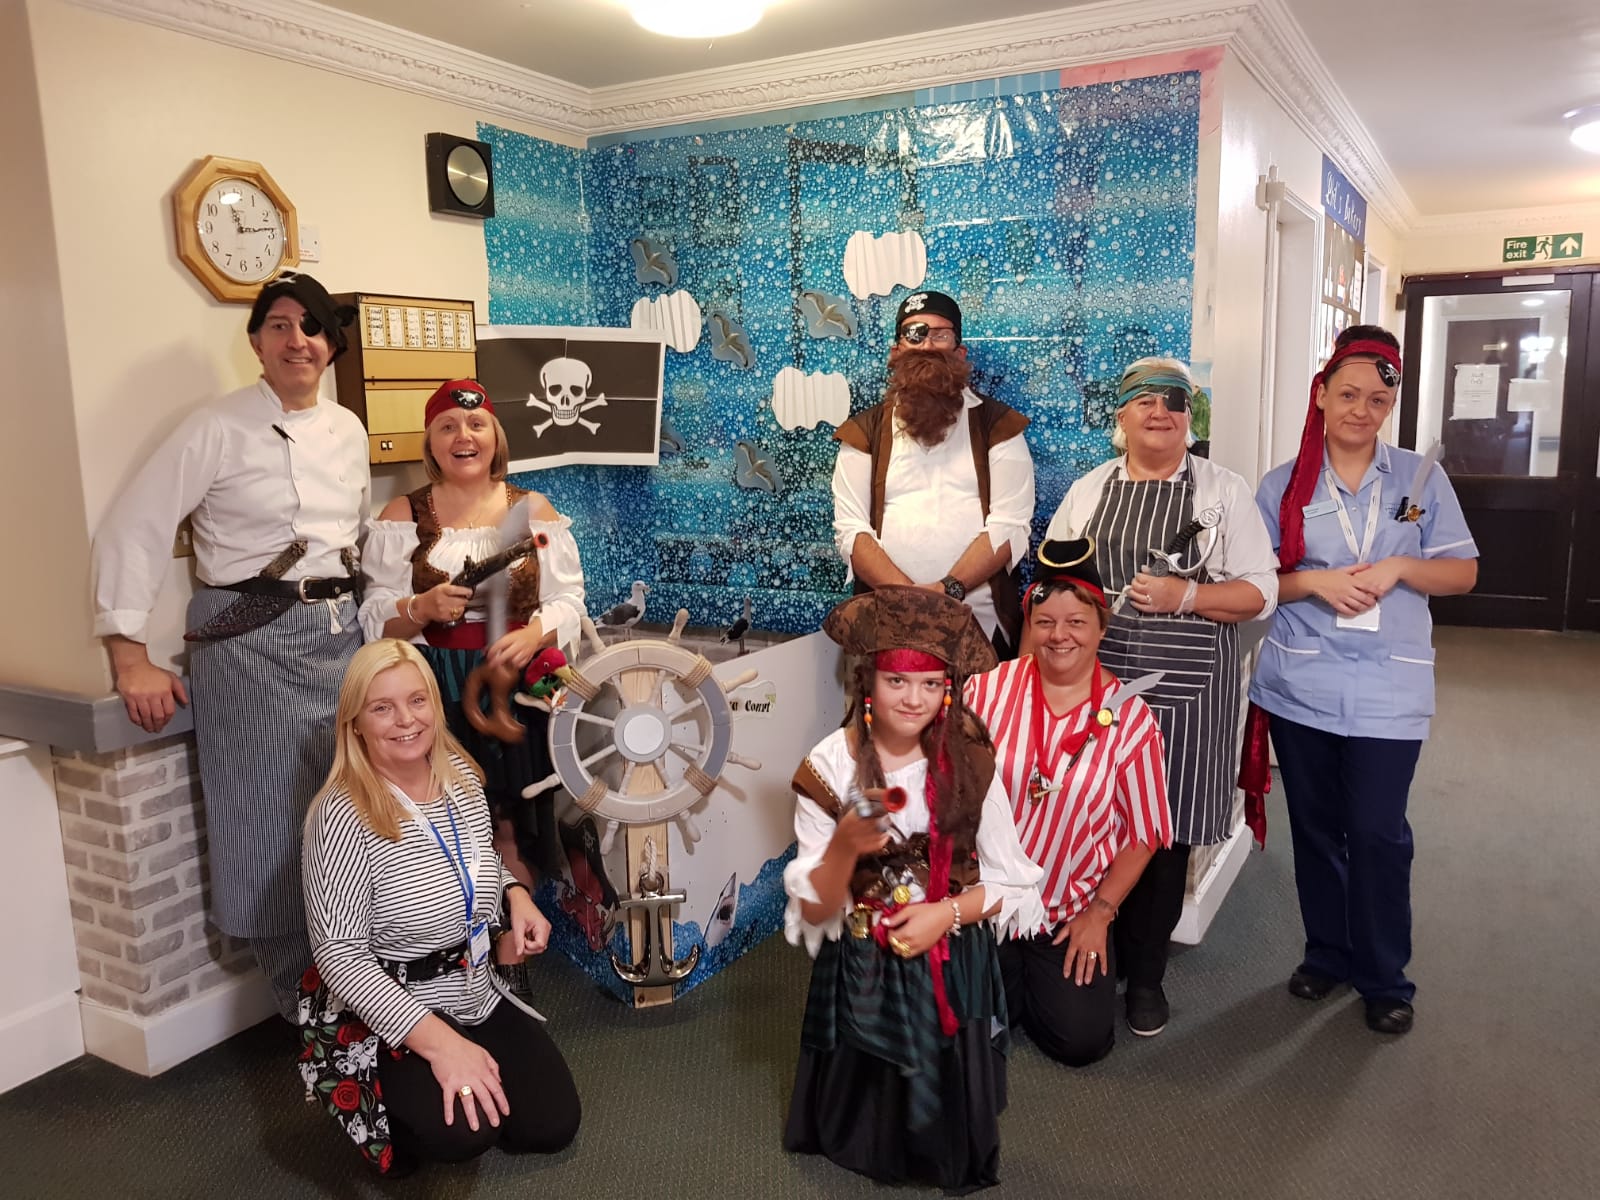 Pirate Party 2018: Key Healthcare is dedicated to caring for elderly residents in safe. We have multiple dementia care homes including our care home middlesbrough, our care home St. Helen and care home saltburn. We excel in monitoring and improving care levels.